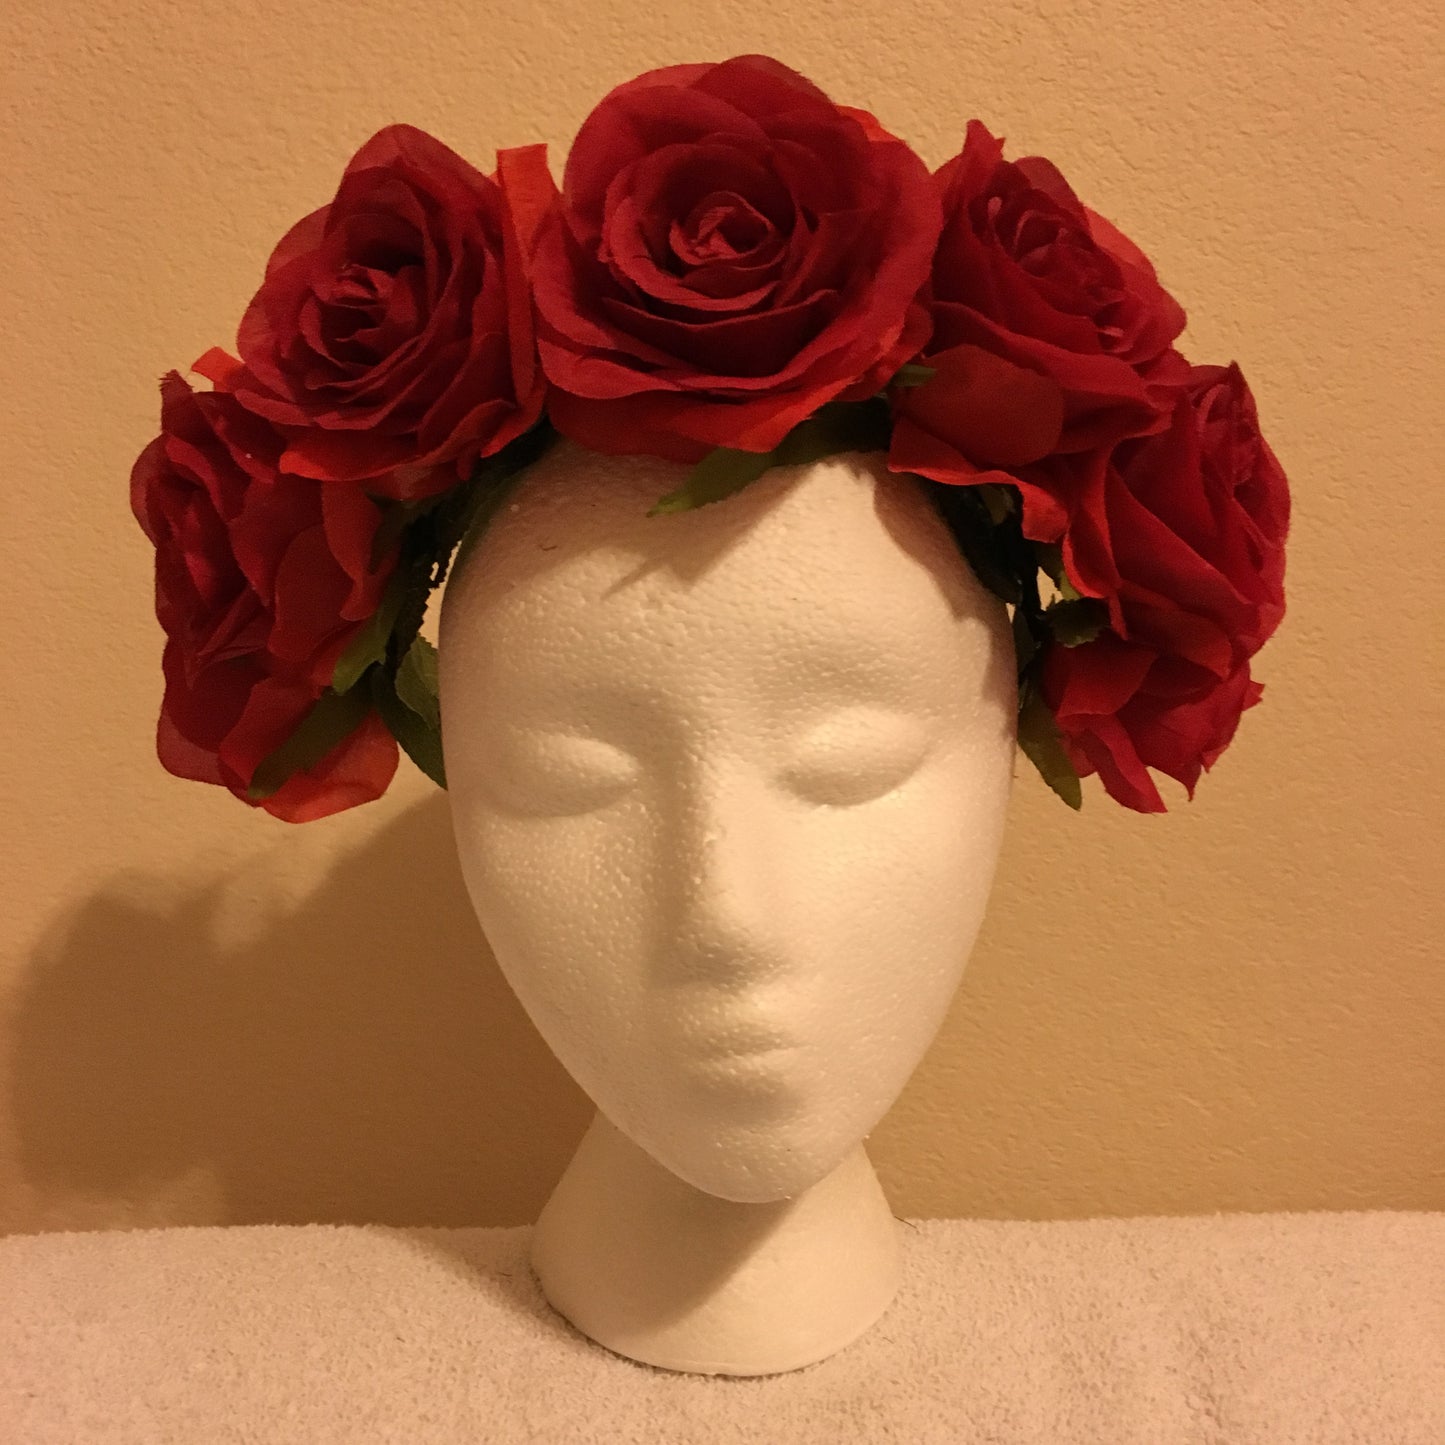 Large Wreath - Large red roses